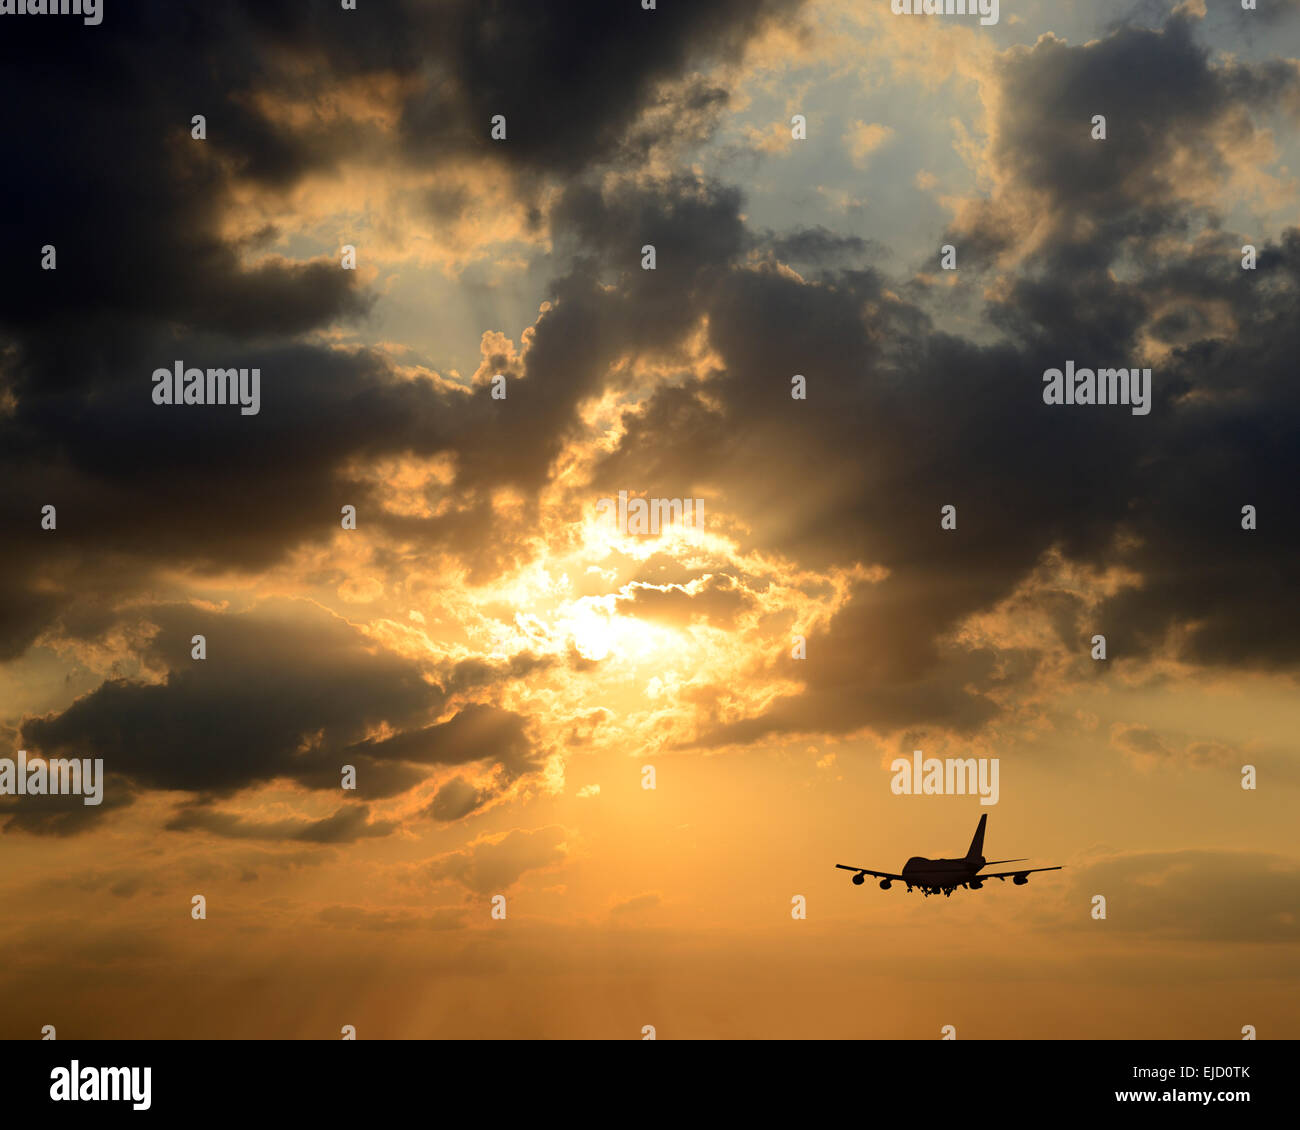 Airplane Silhouetted Against a Sunset. Stock Photo